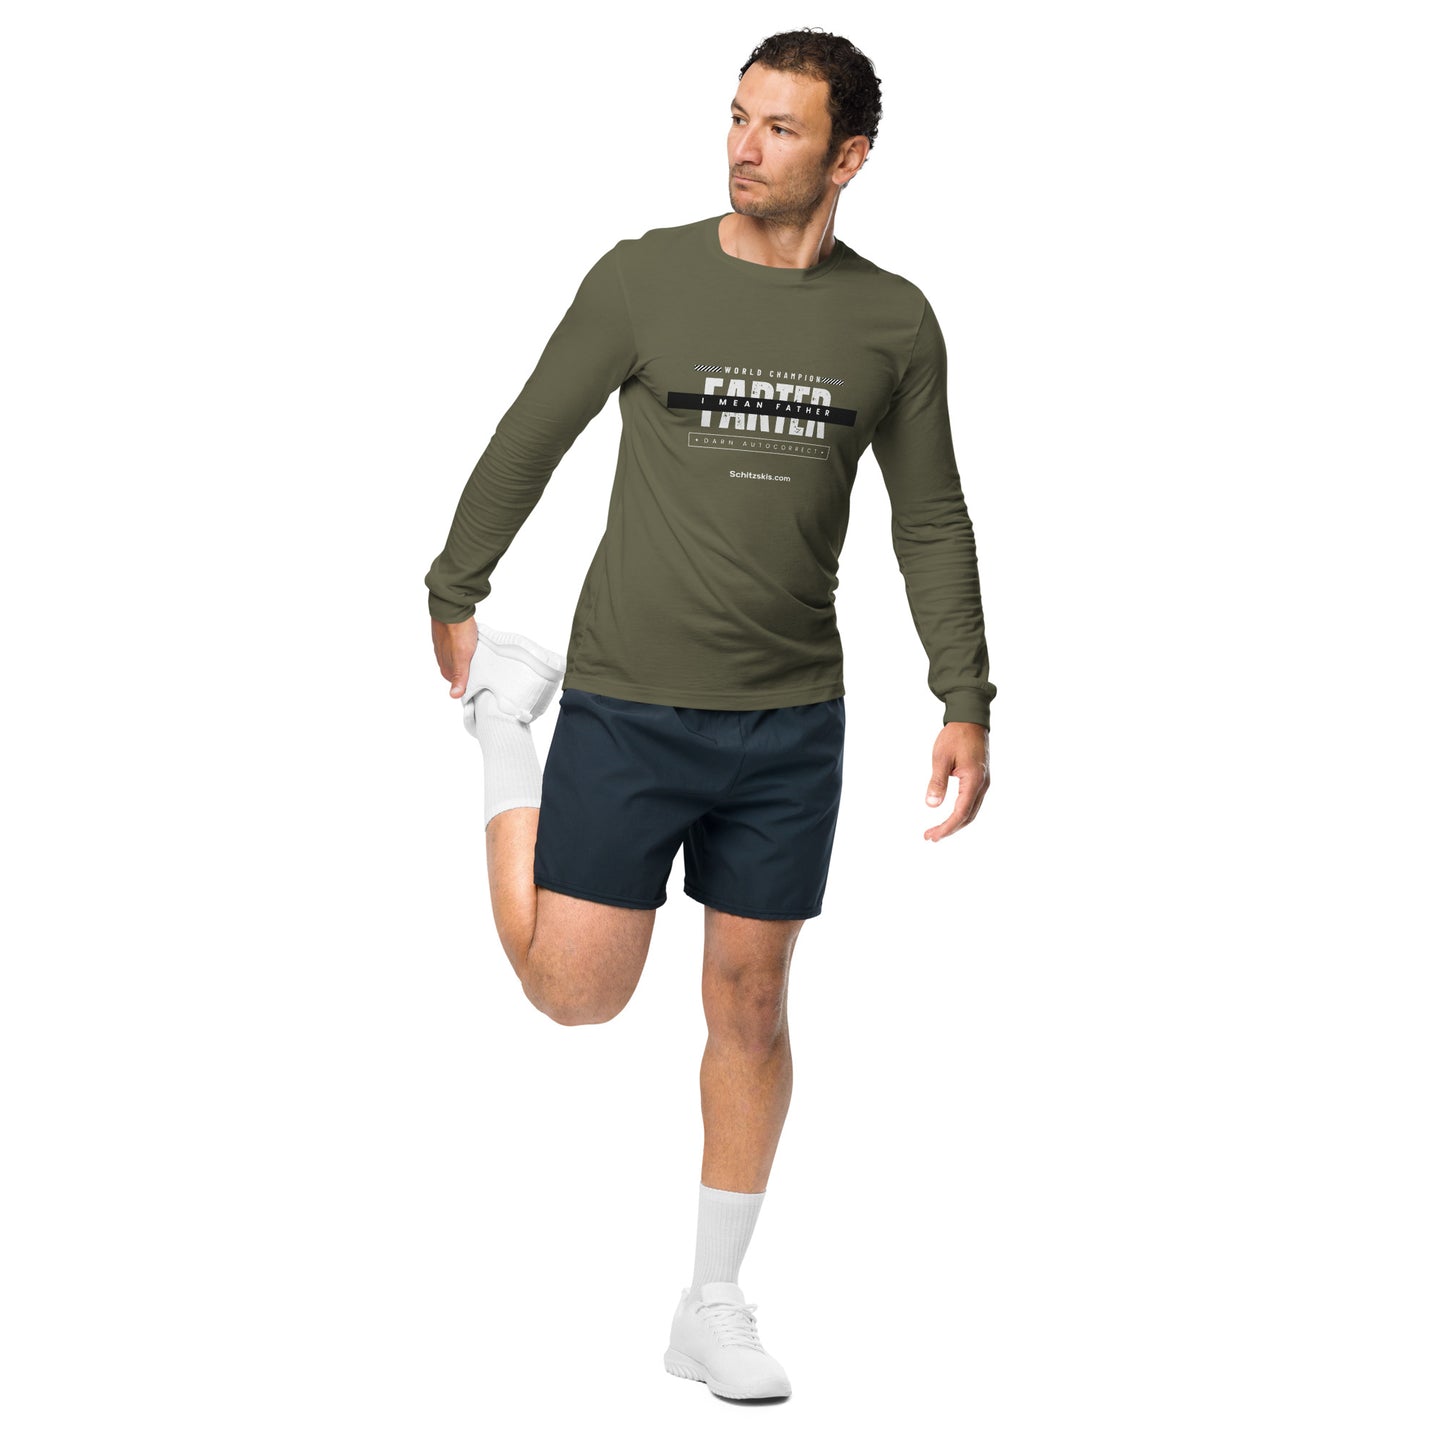 World Champion Long Sleeve Tee in Army green color front view on athlete